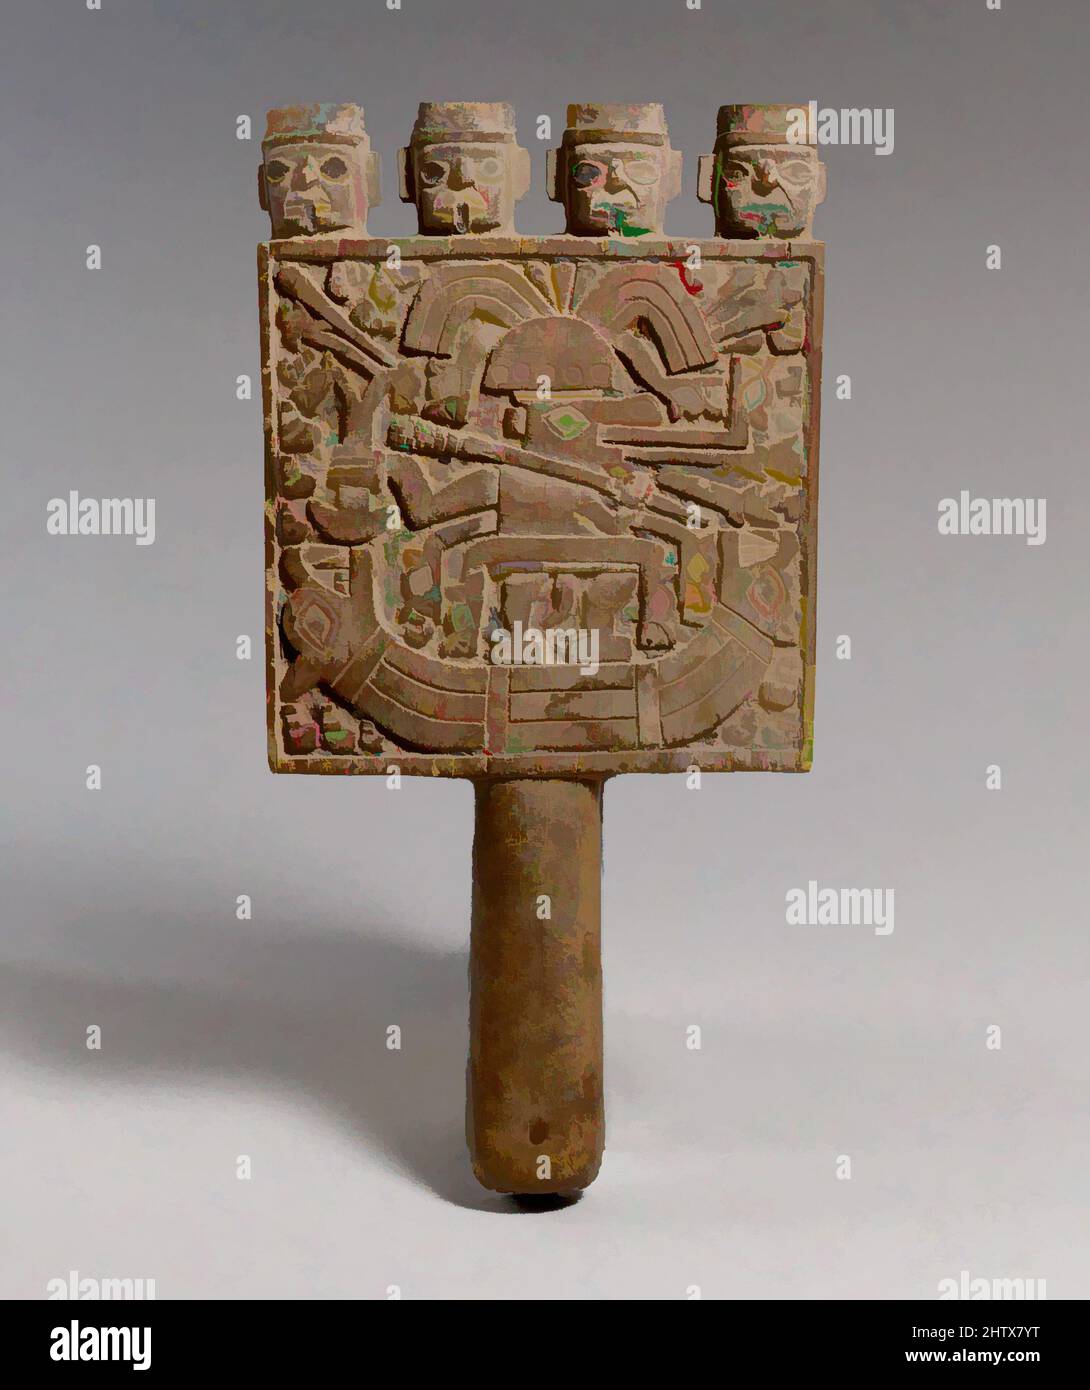 Art inspired by Mirror Frame, 9th–12th century, Peru, Wari-Chimú, Wood, H.10 1/4 x W. 5 1/4in. (26 x 13.3cm), Wood-Implements, The imagery and carving style of this mirror frame suggest that it was made by the northern Chimú people when influences from the southern Wari culture were, Classic works modernized by Artotop with a splash of modernity. Shapes, color and value, eye-catching visual impact on art. Emotions through freedom of artworks in a contemporary way. A timeless message pursuing a wildly creative new direction. Artists turning to the digital medium and creating the Artotop NFT Stock Photo